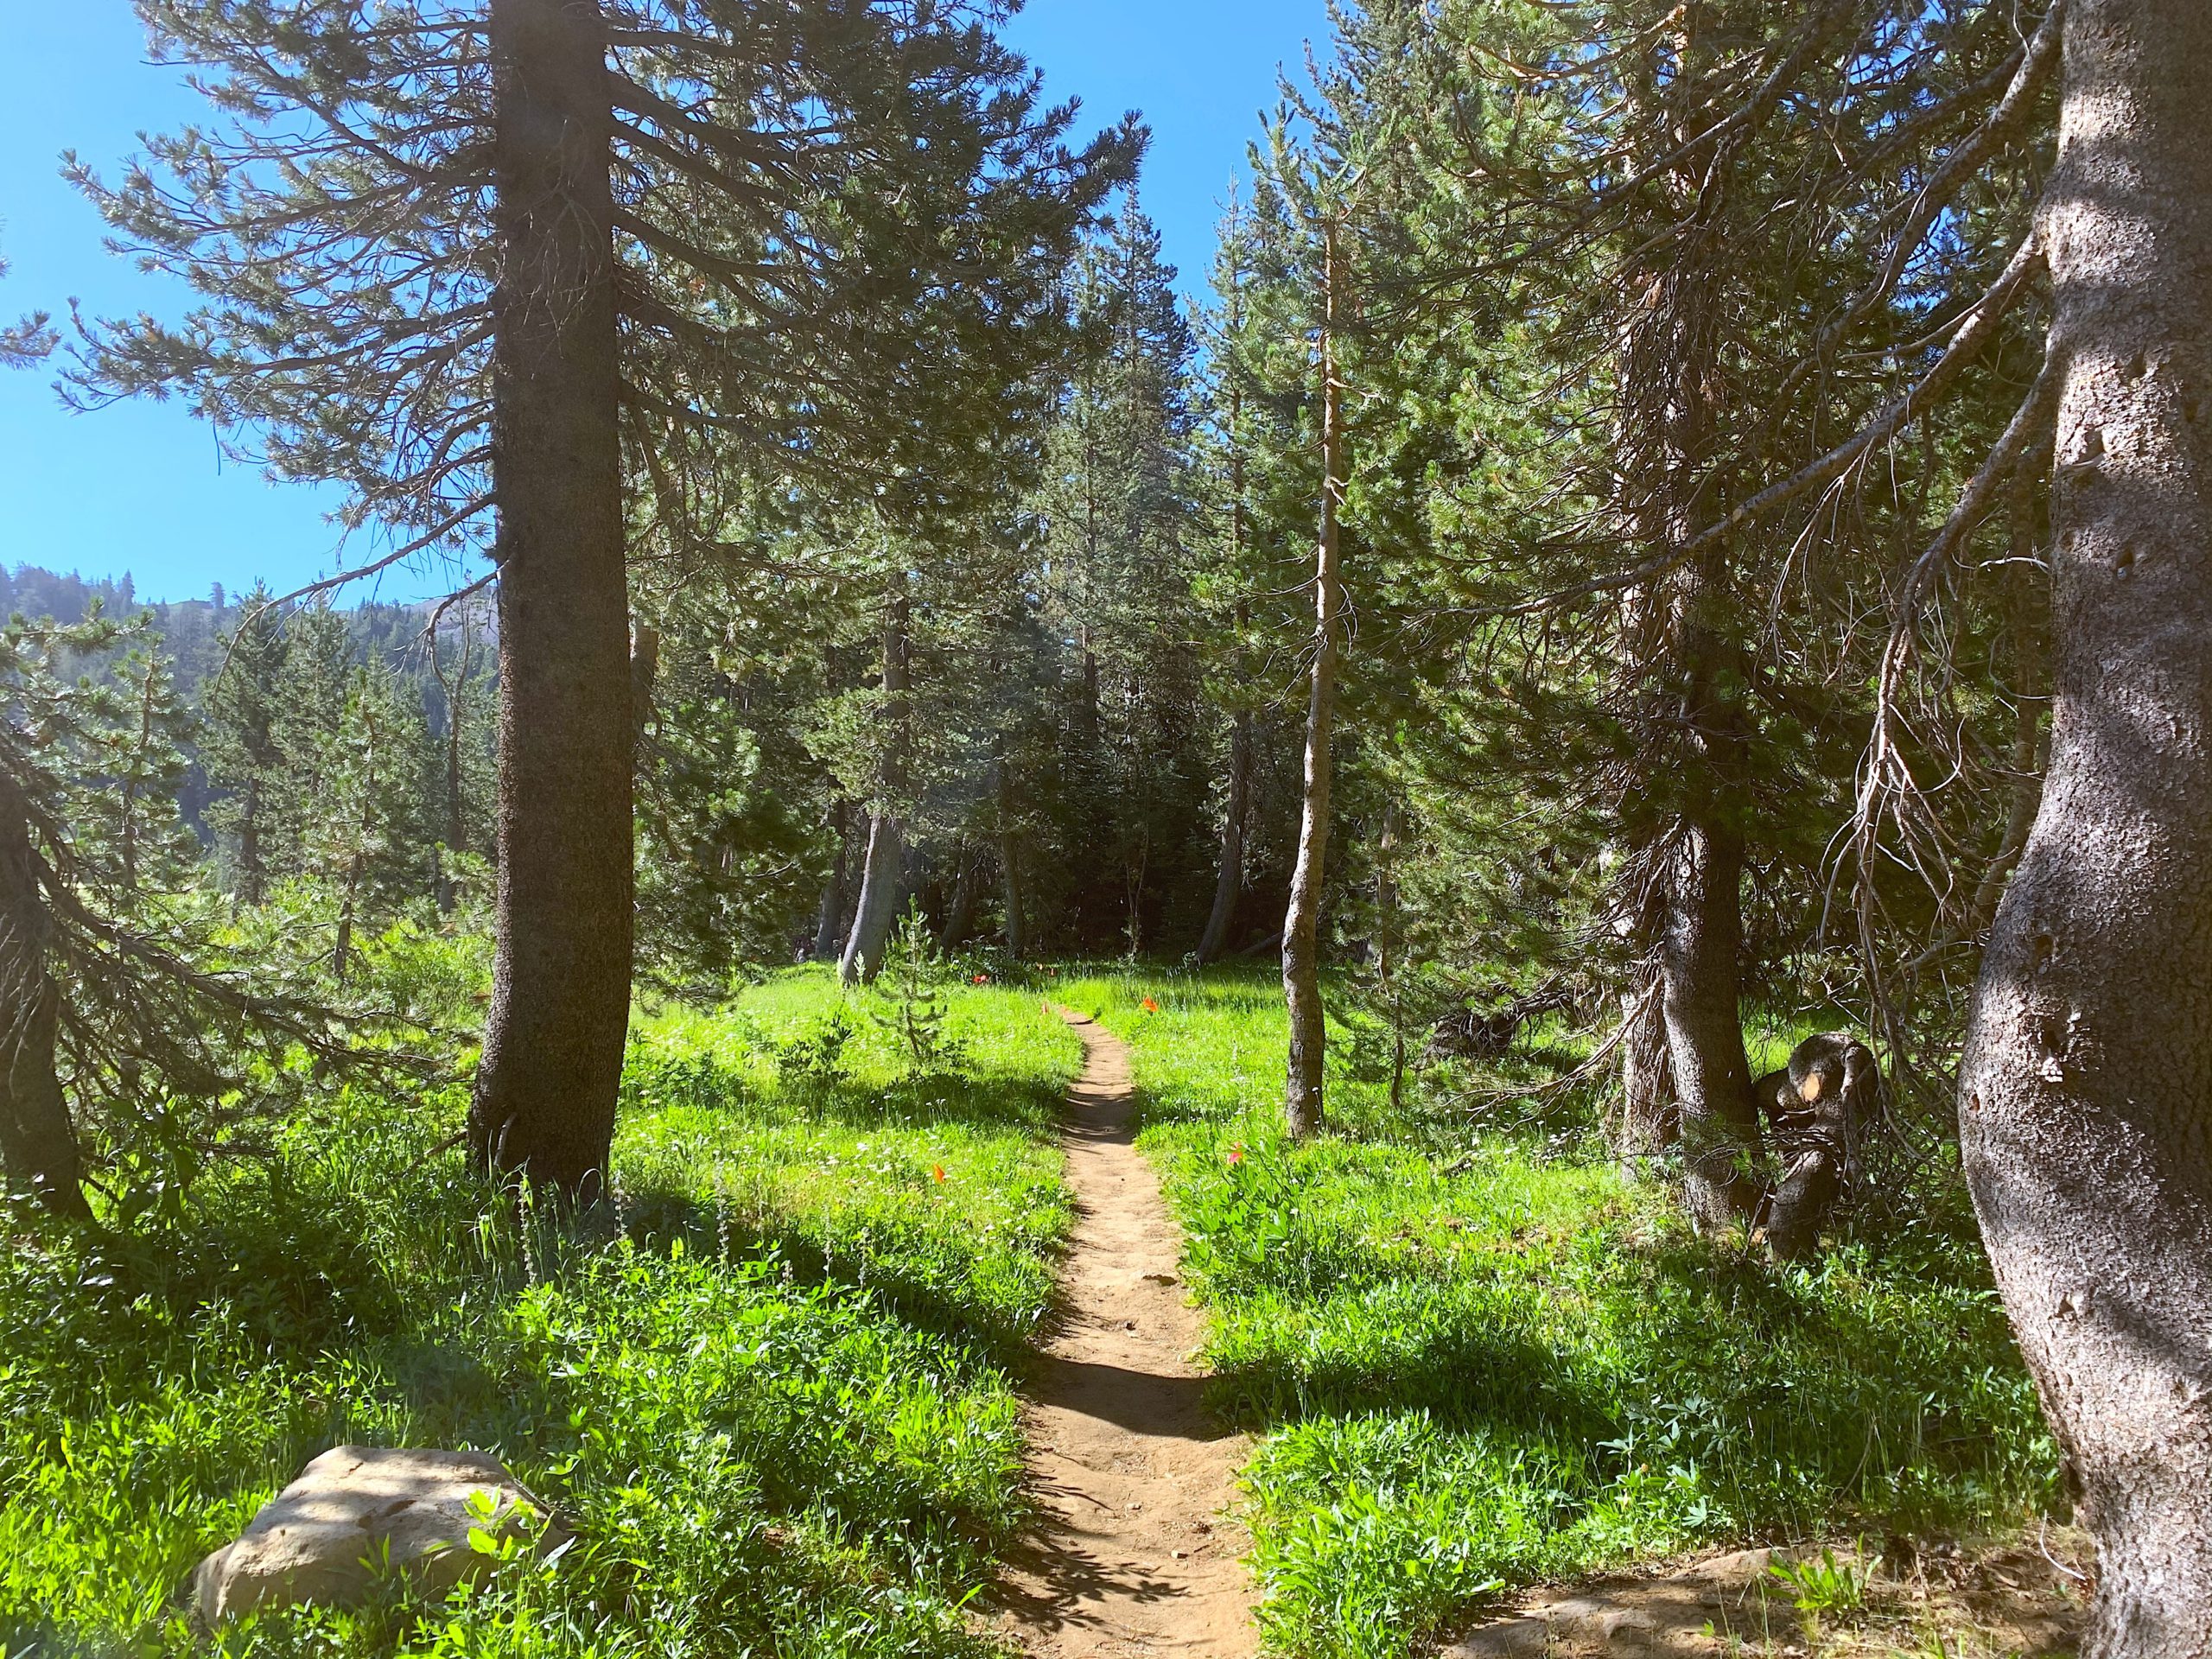 PCTA launches new interactive map for the Pacific Crest Trail - Pacific  Crest Trail Association